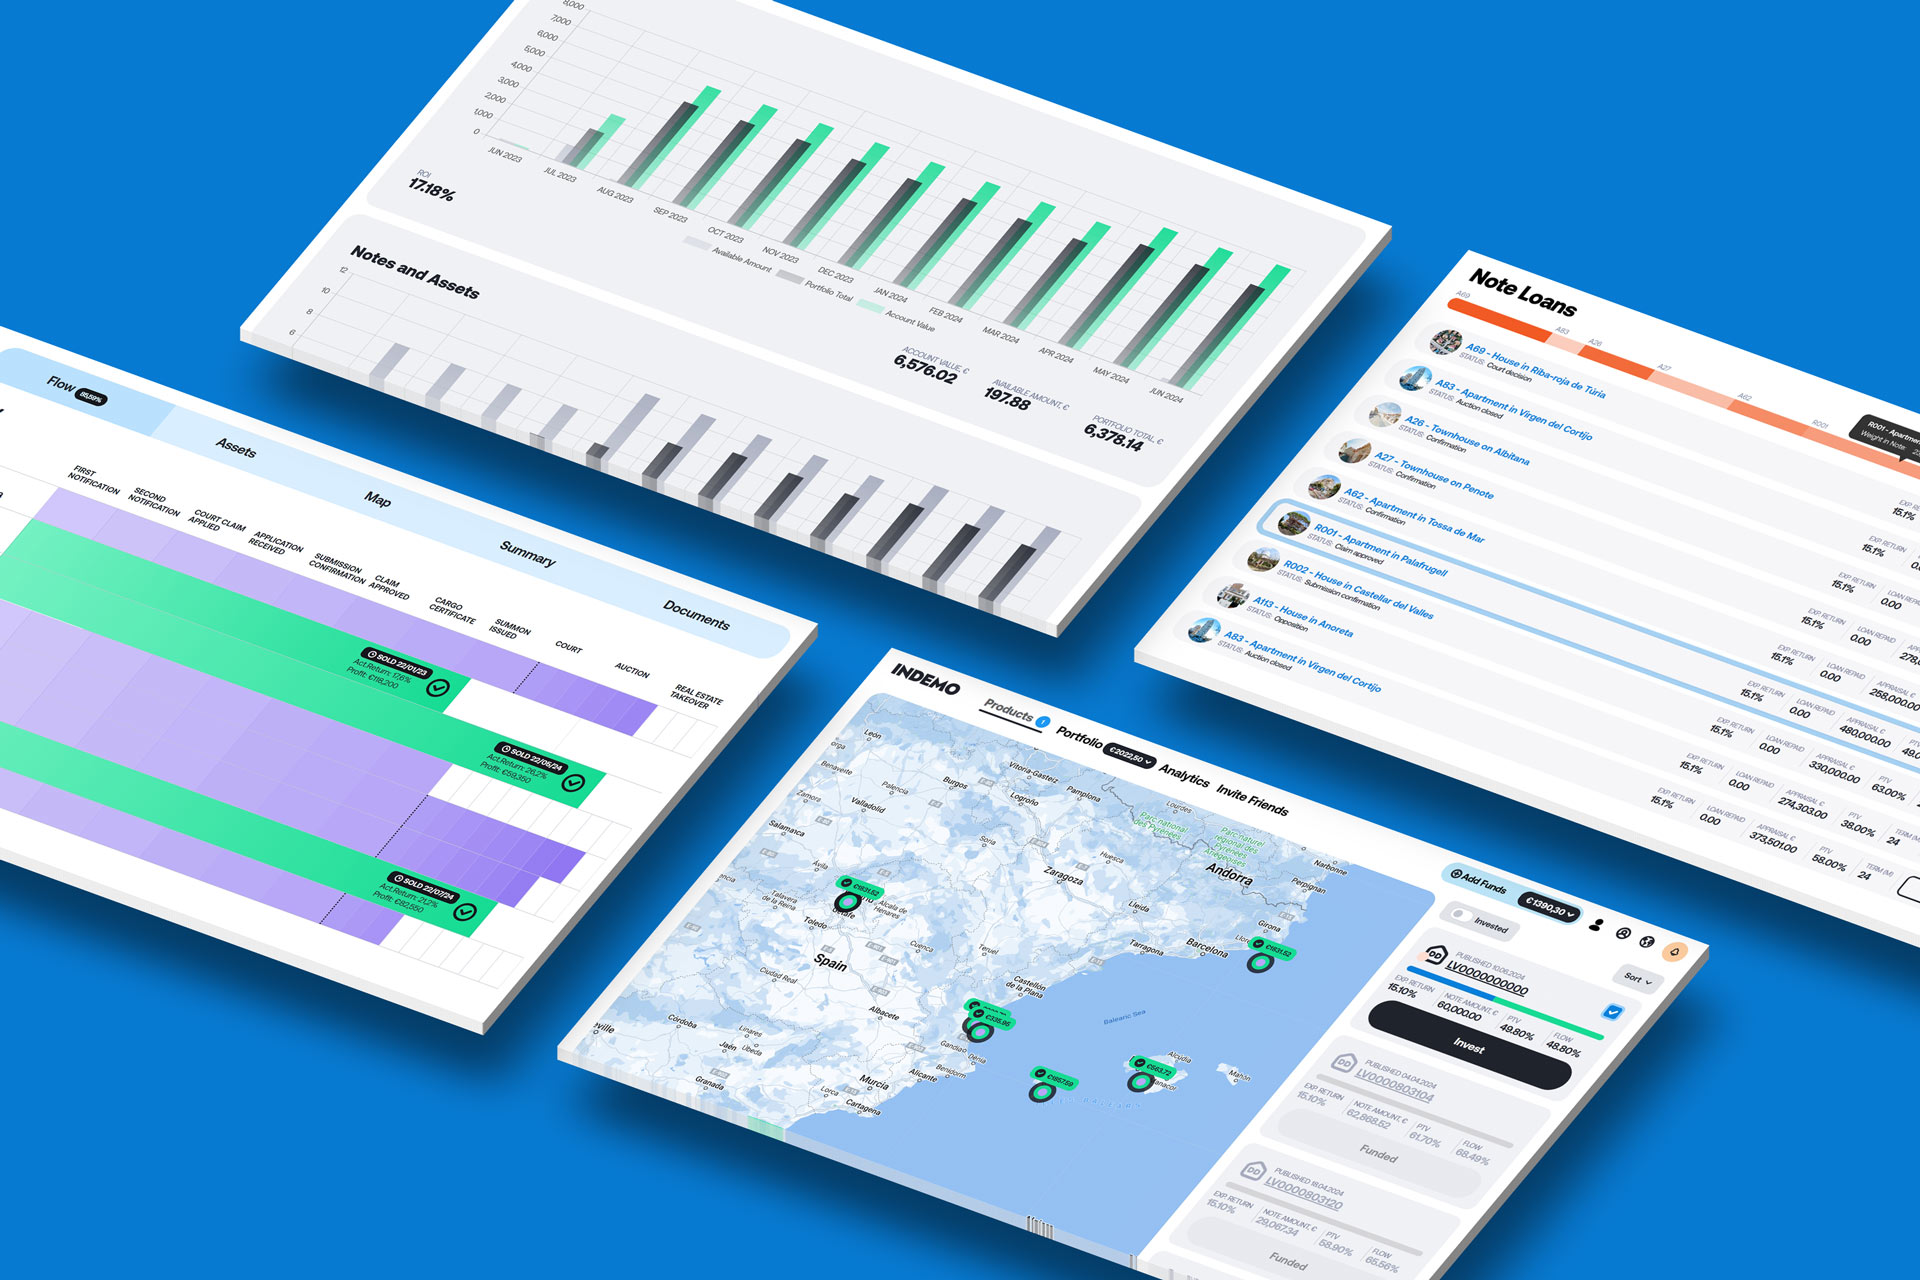 🚨Indemo launches major new platform features including revamped portfolio page, and analytics dashboard!